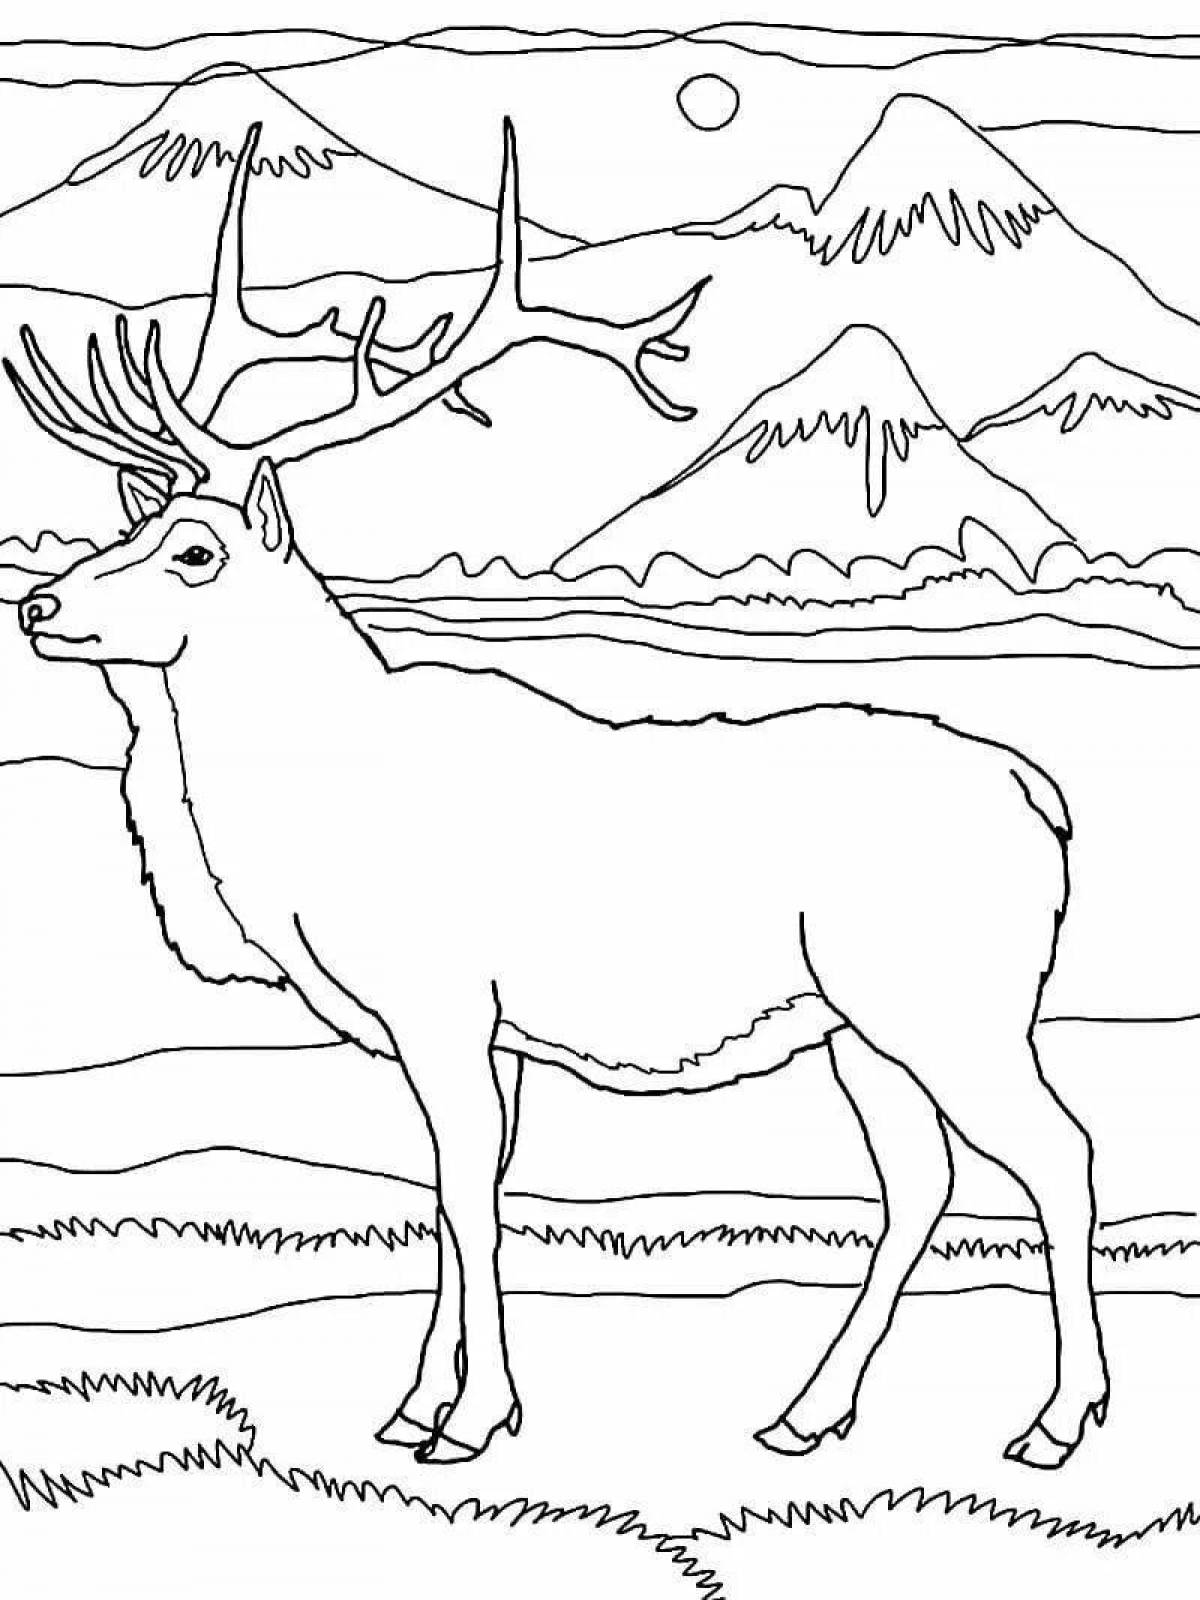 Live coloring animals of the northern senior group